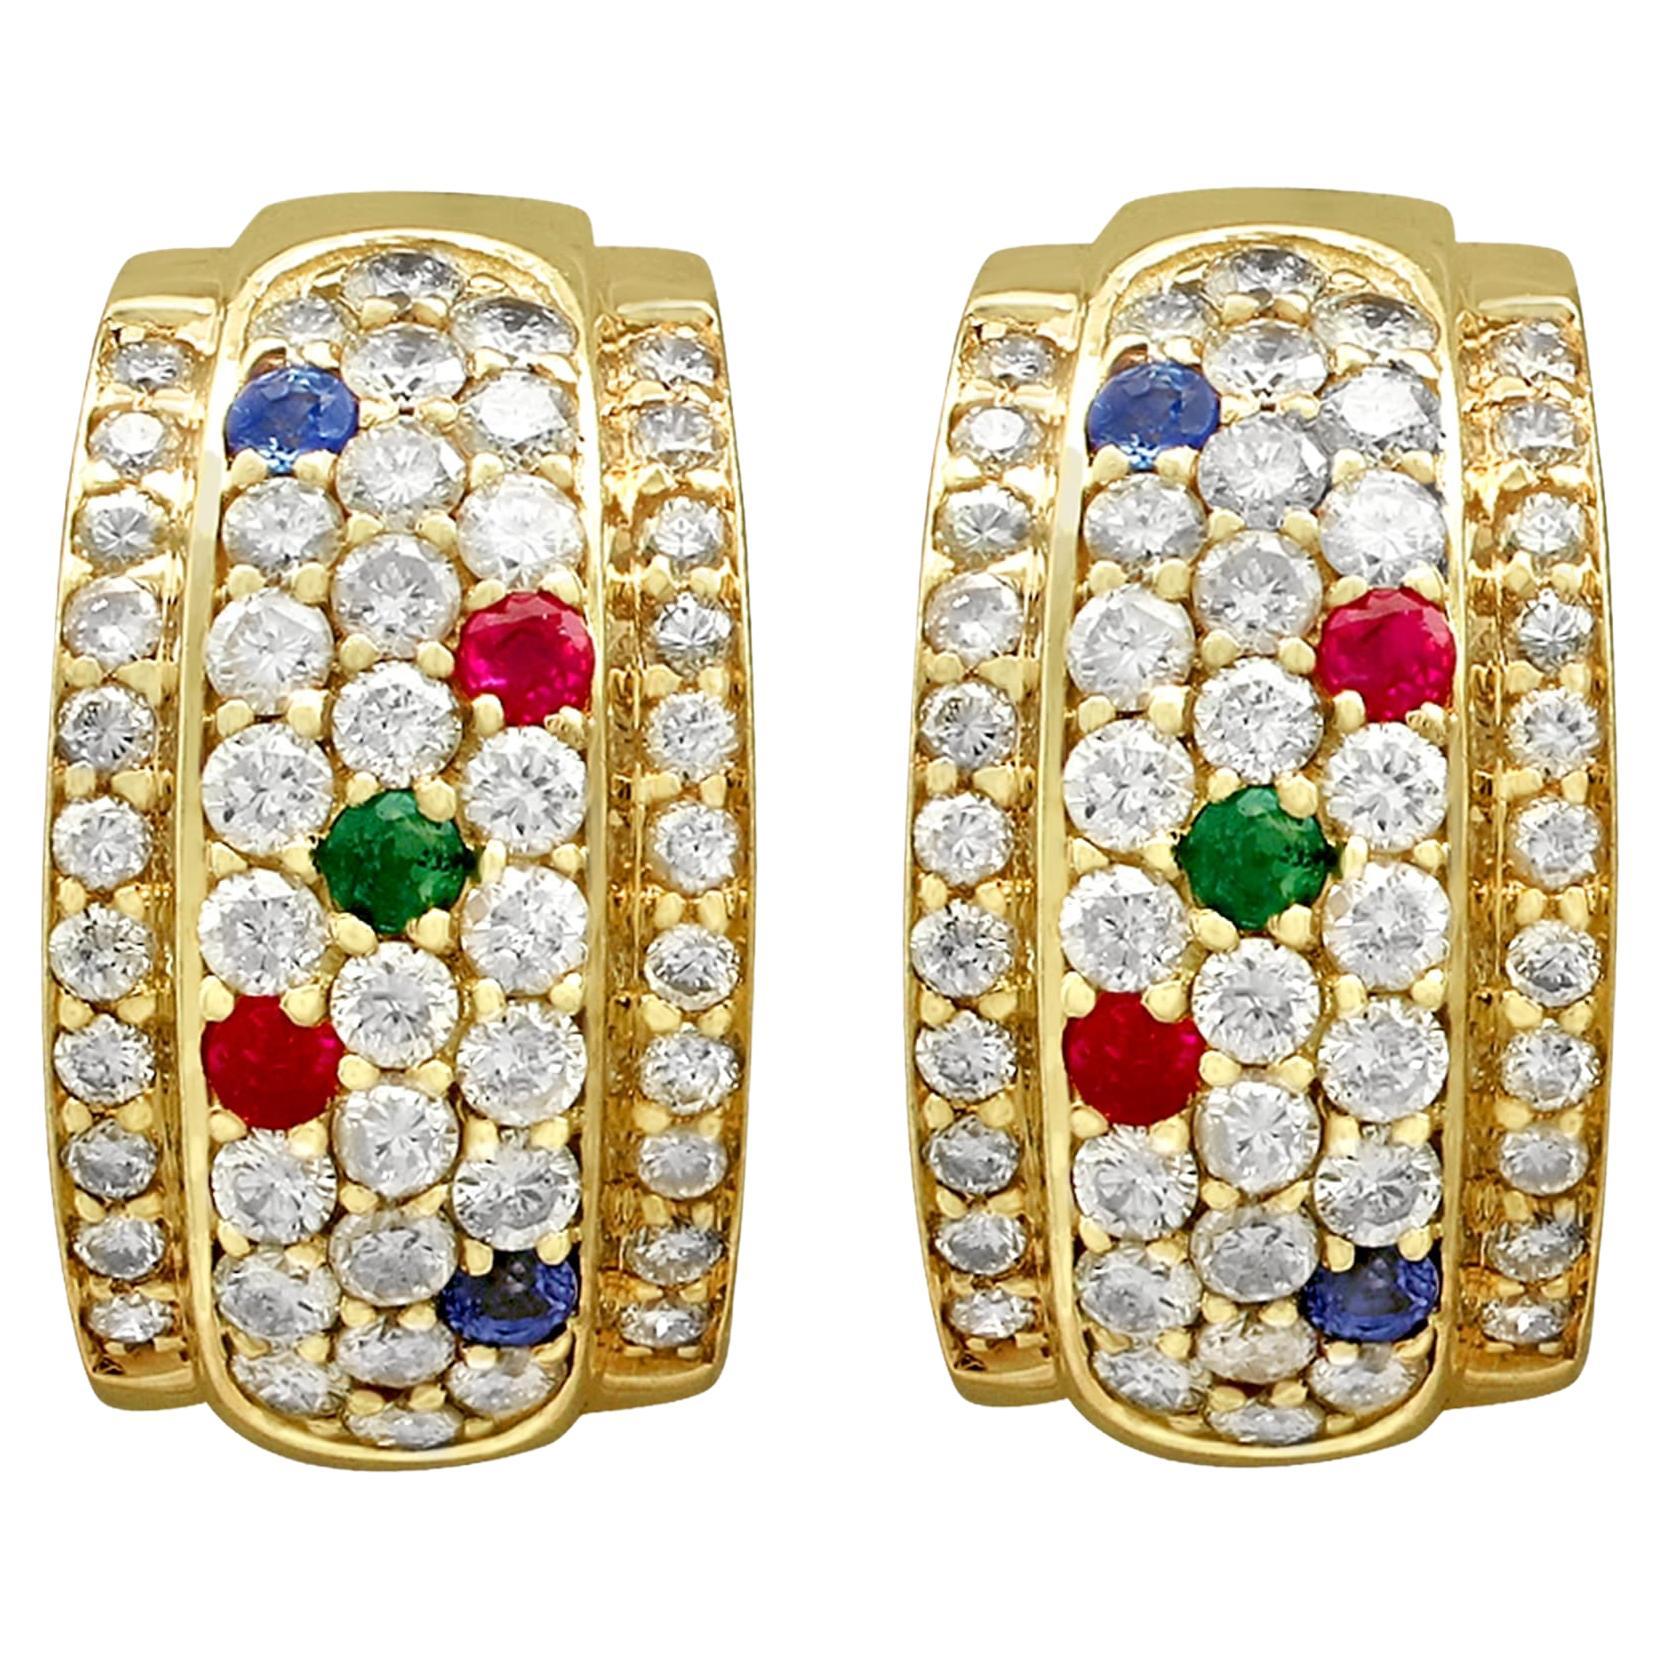 Vintage Diamond Sapphire Ruby and Emerald Earrings in Yellow Gold